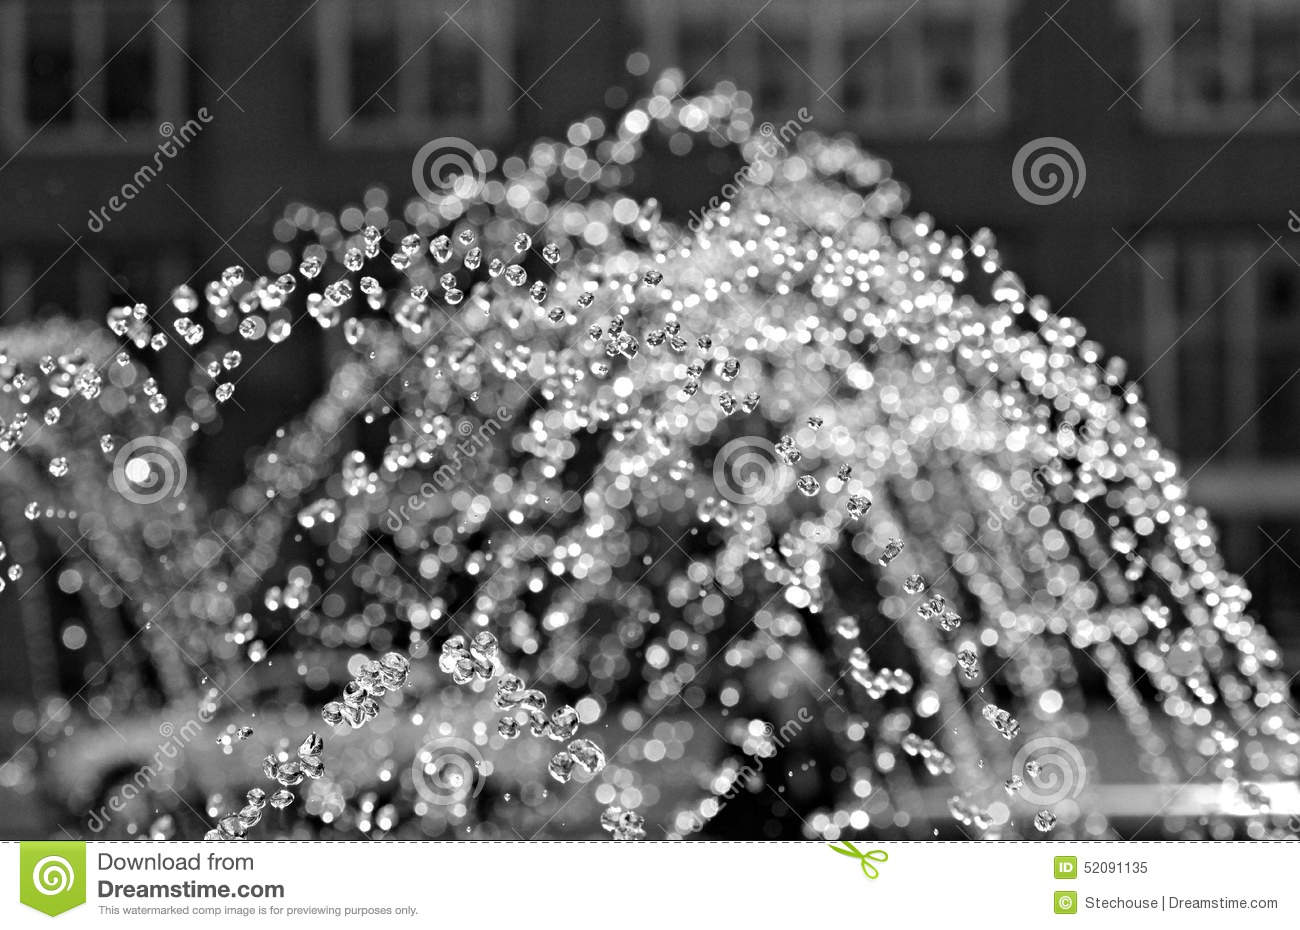 Fountain Of Life Clipart.